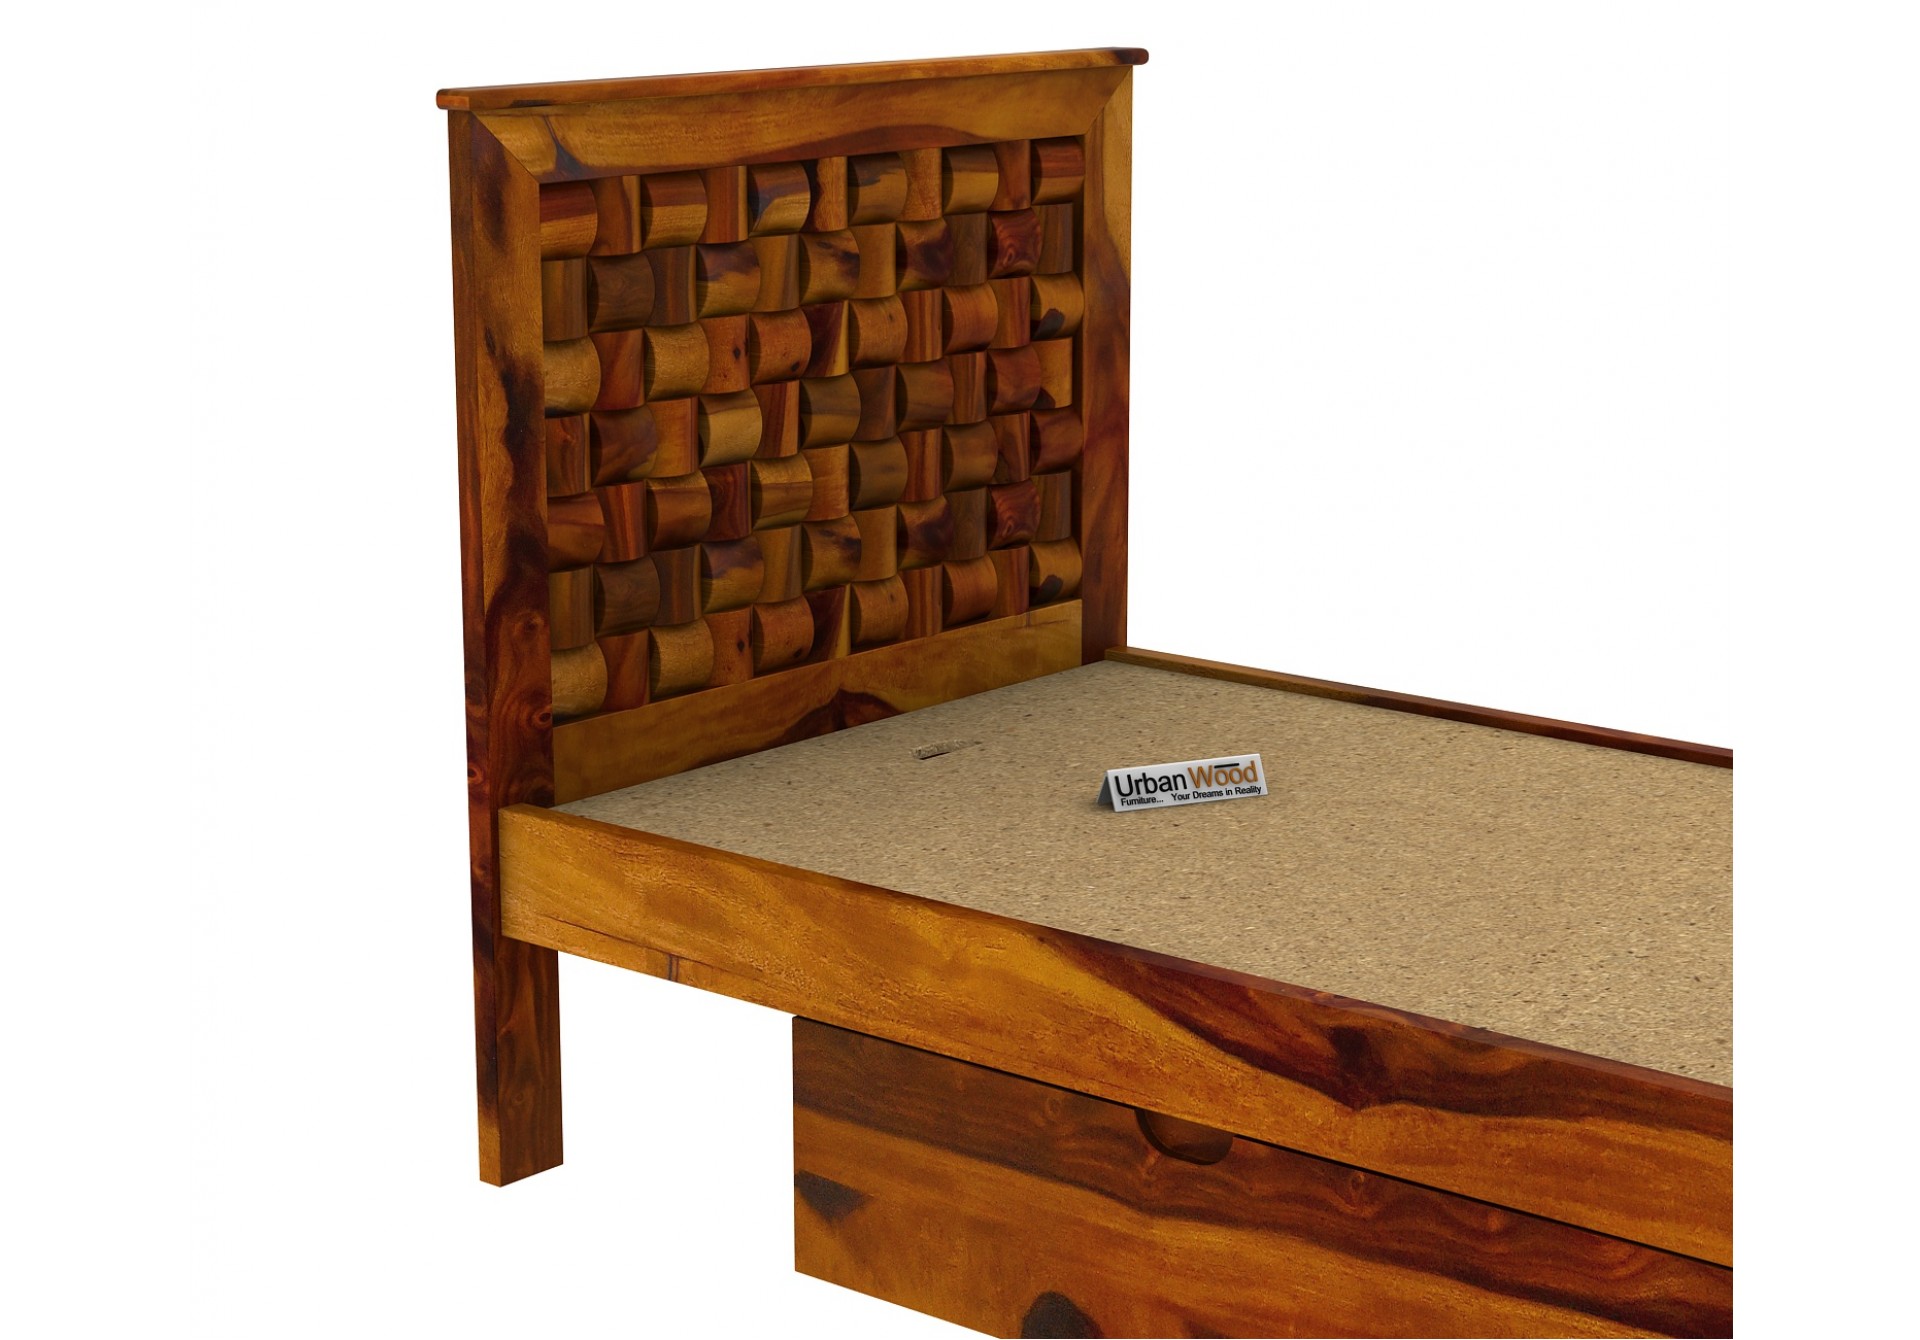 Hover Single Bed with Drawer Storage ( Honey Finish )